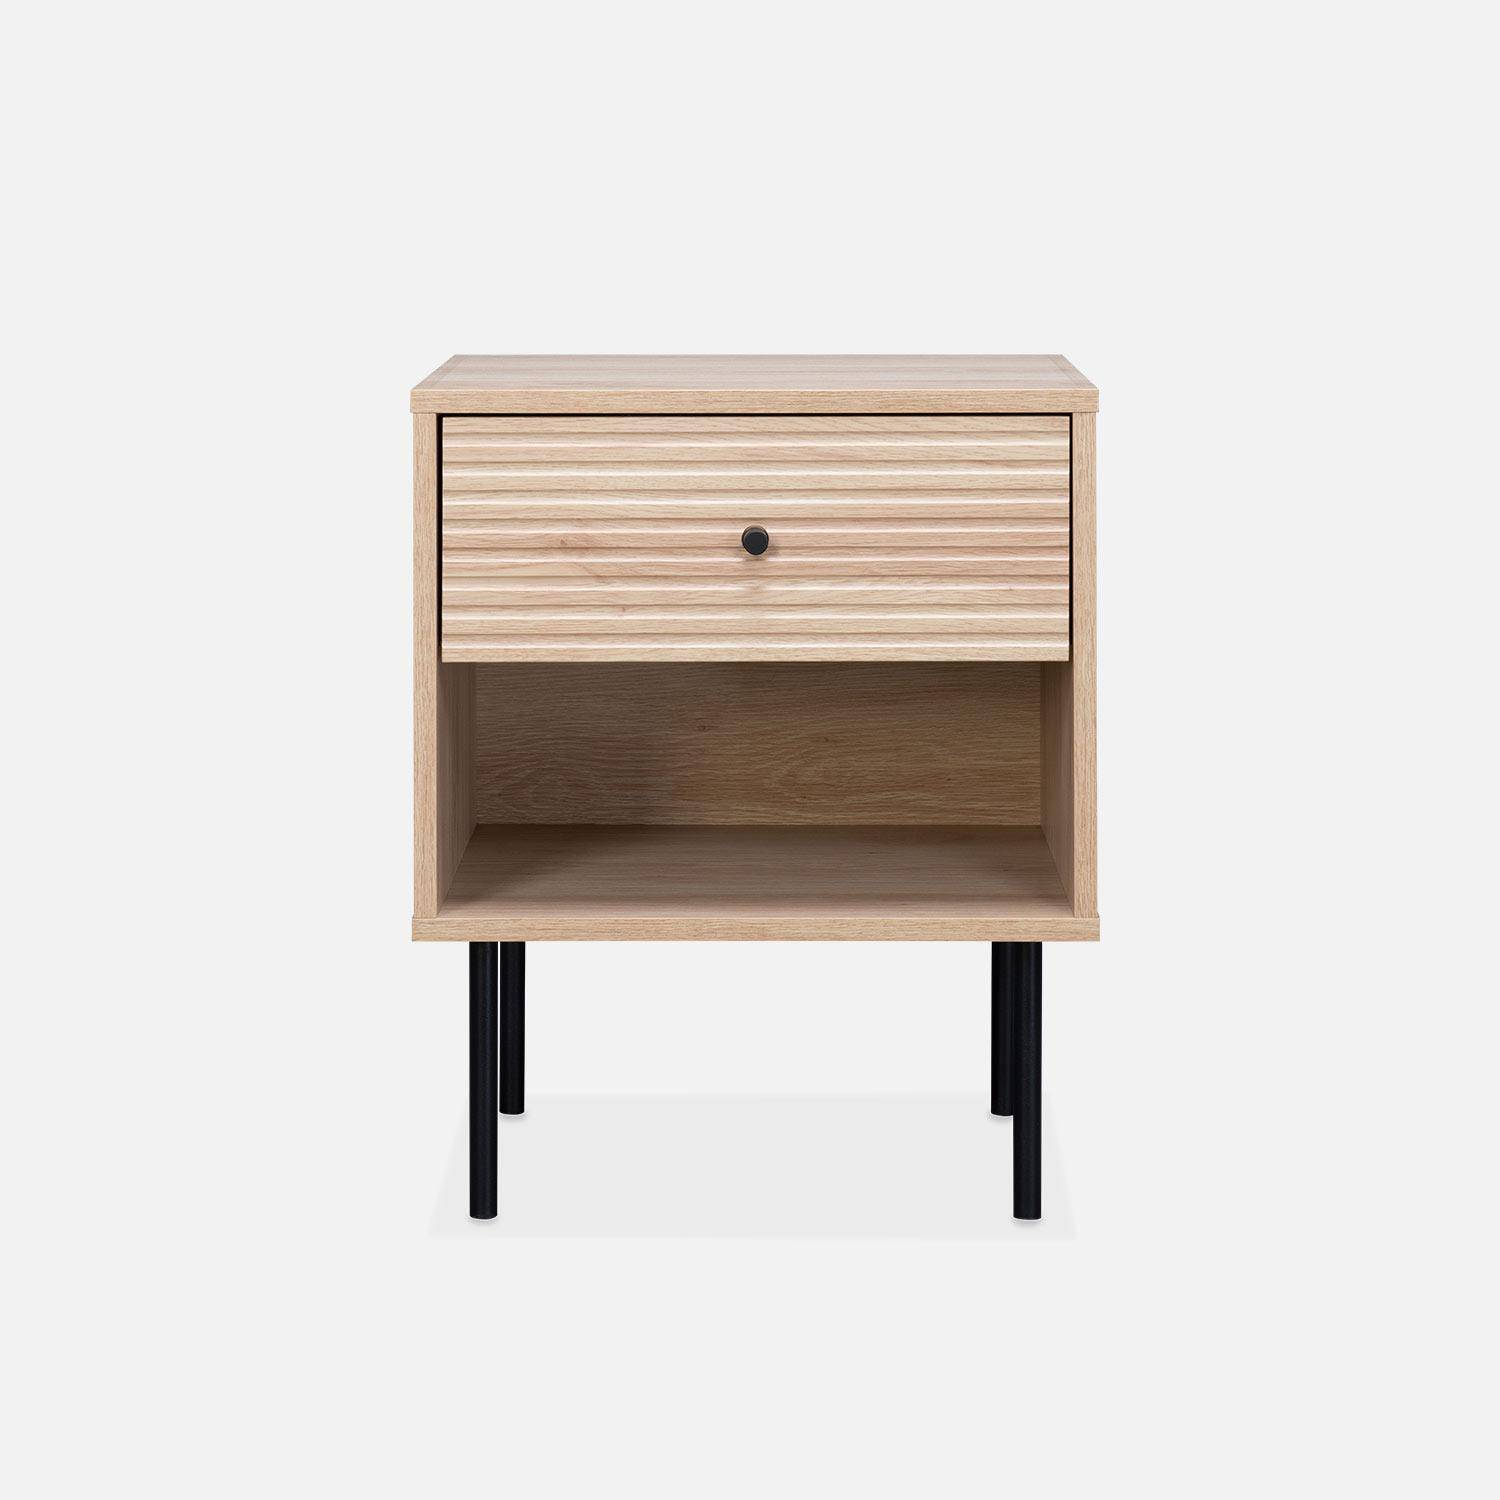 Grooved wood-effect bedside table, 45x39.5x55cm - Braga - Natural wood colour Photo4